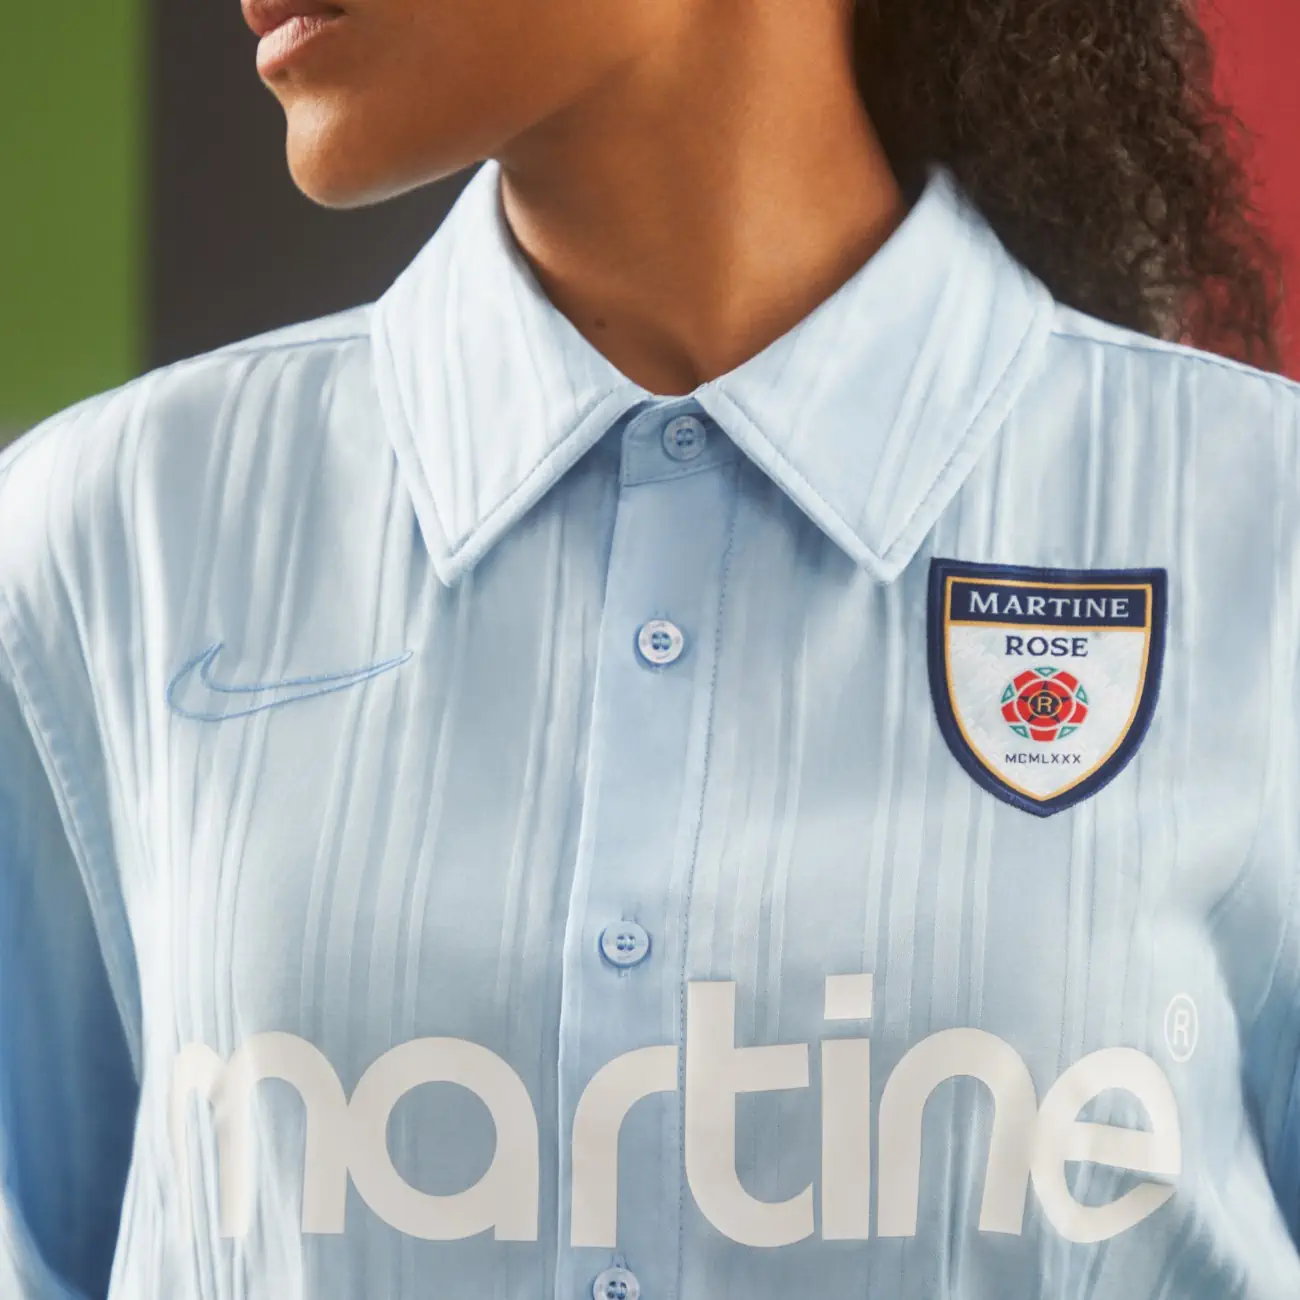 The Nike x Martine Rose collection fuses tailoring and football for women